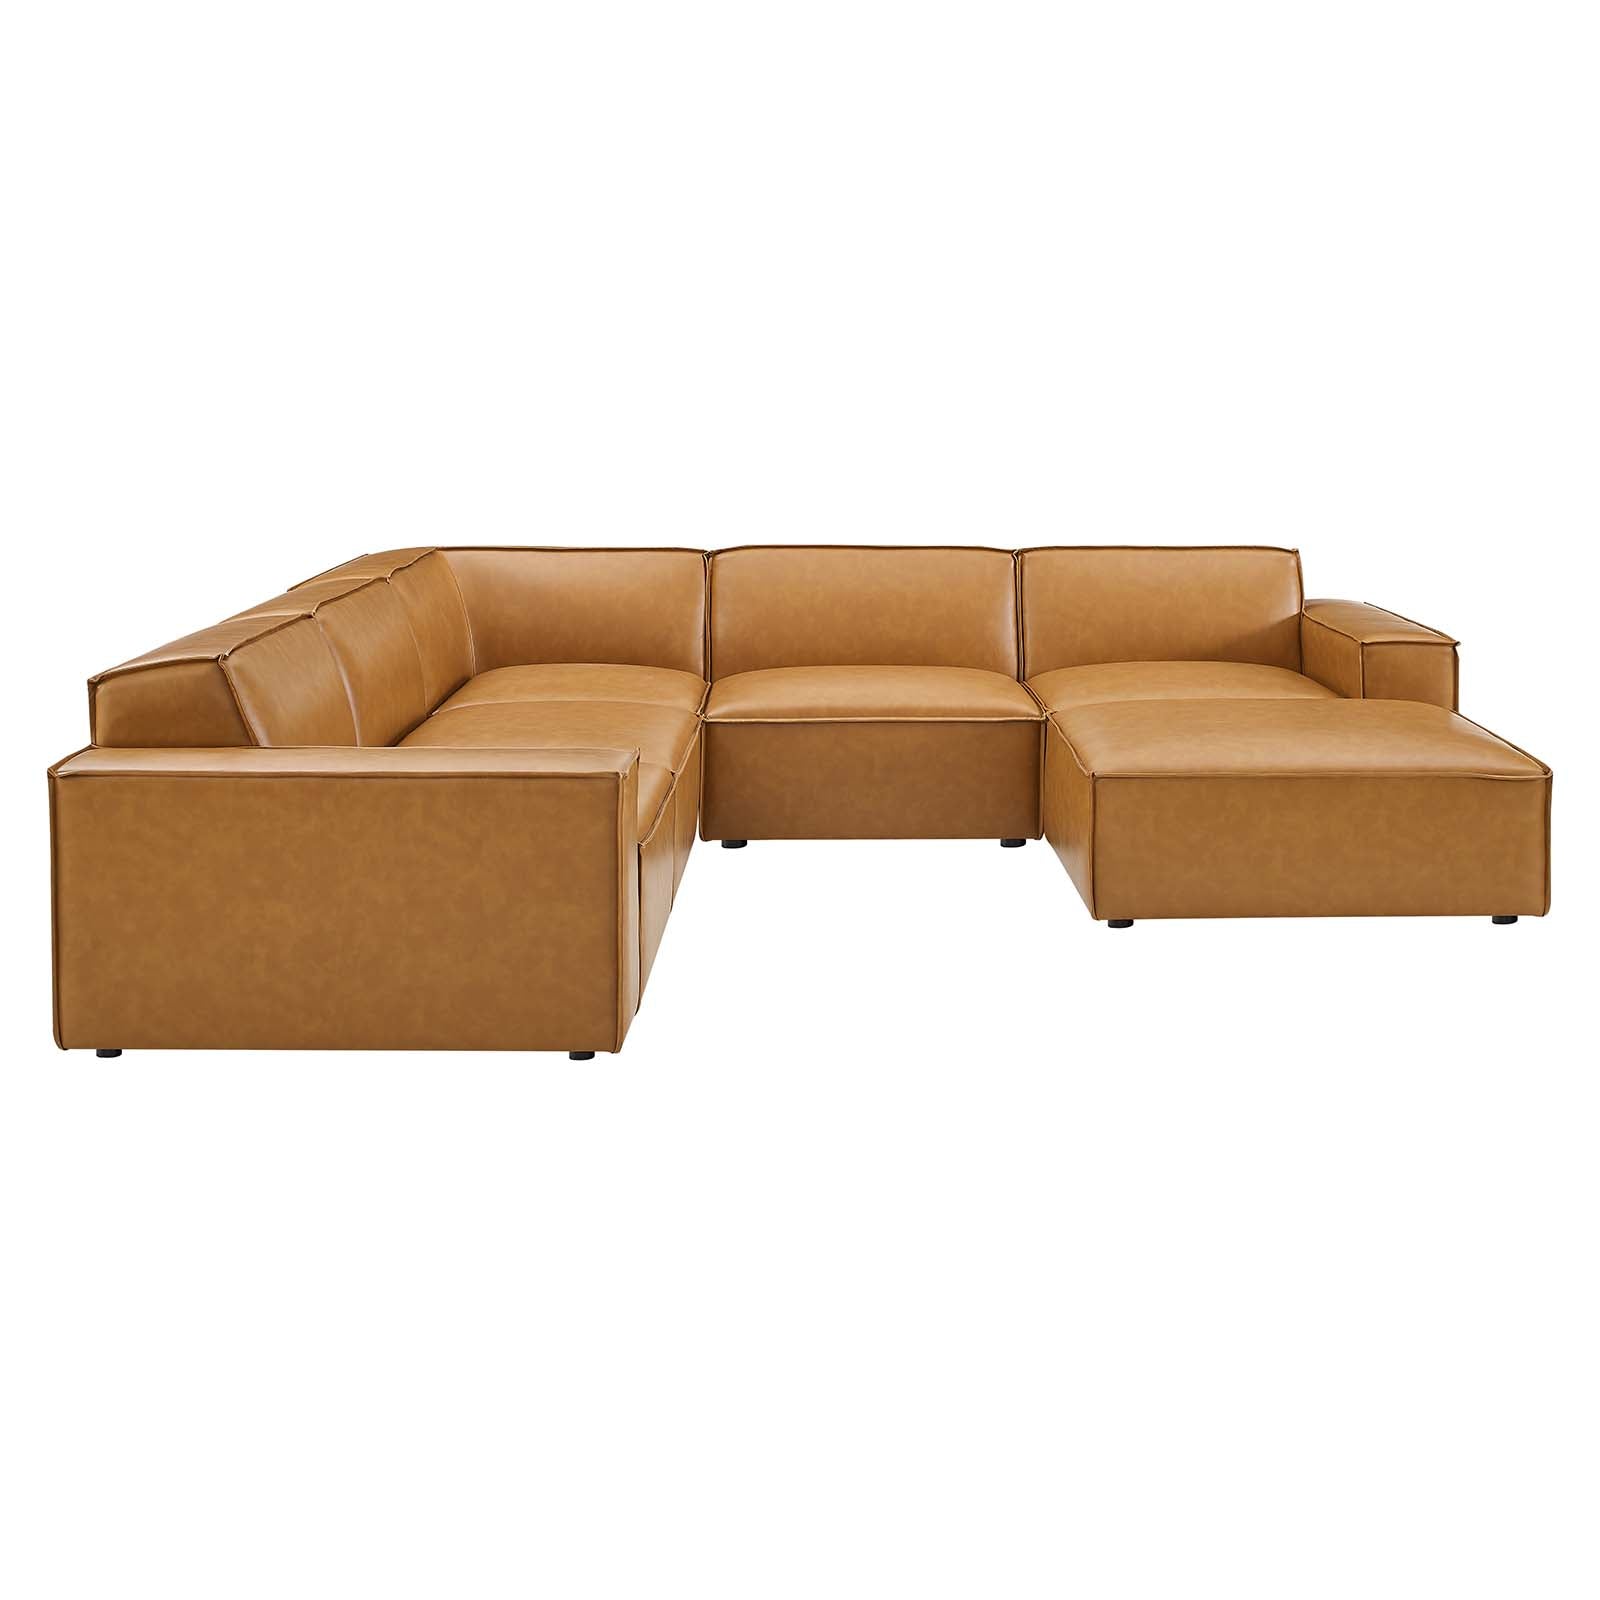 Modway Sectional Sofas - Restore 6-Piece Leather Sectional Sofa Tan